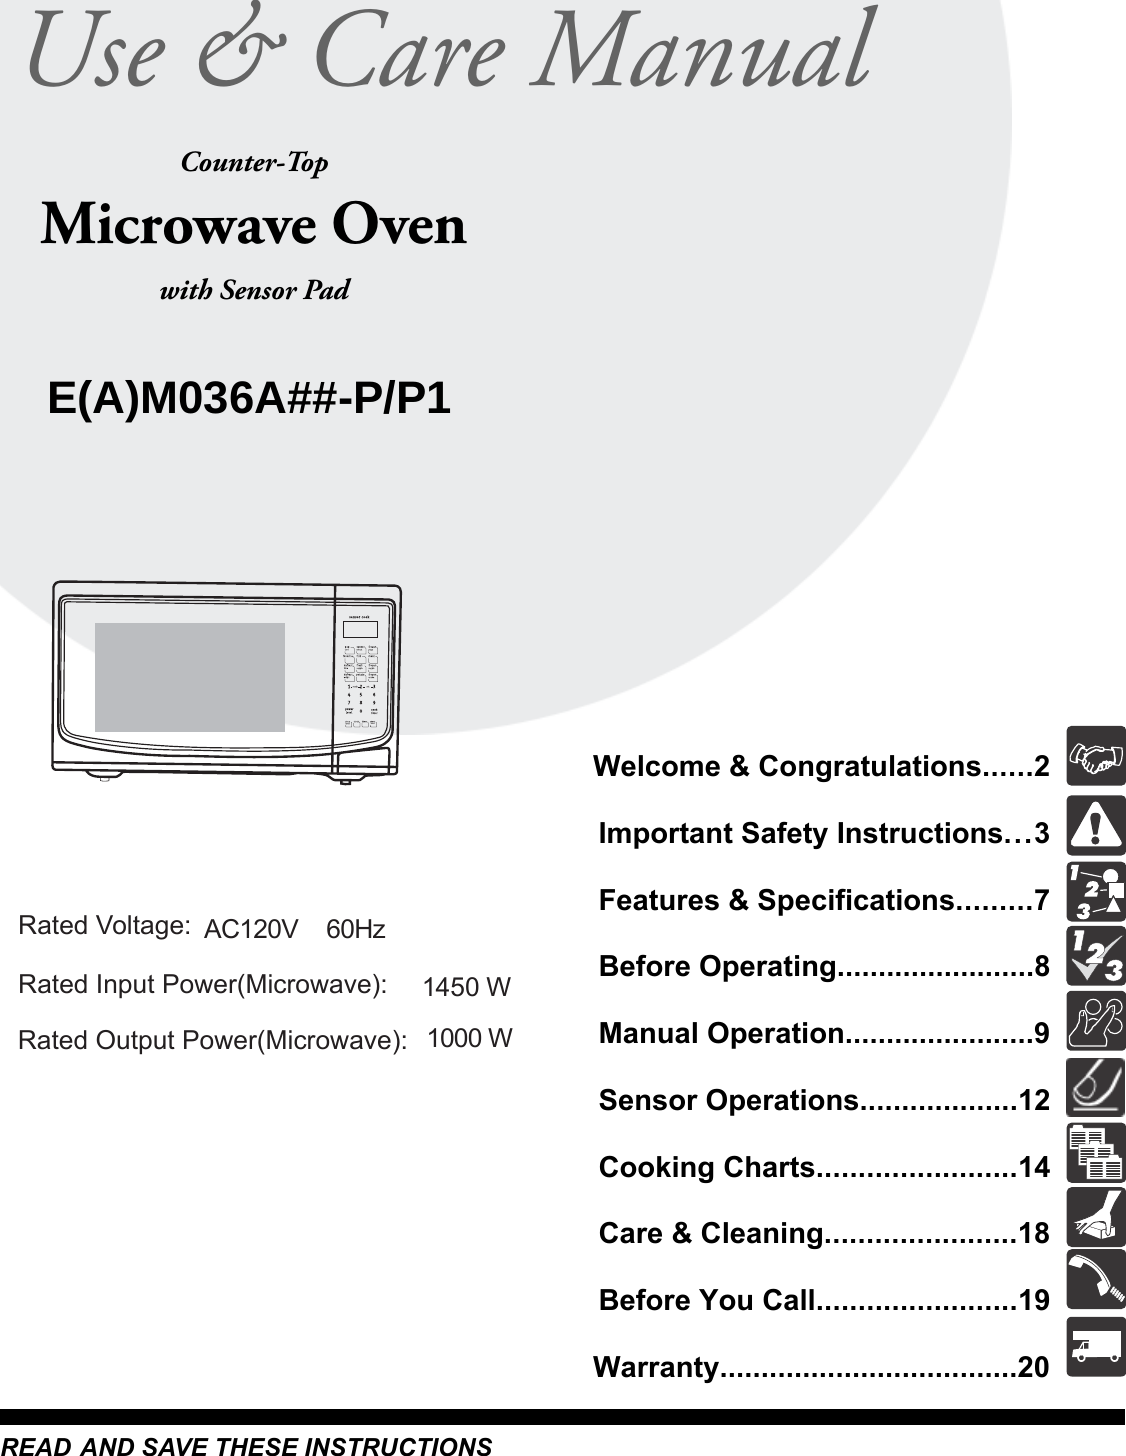 Questions or for Service Call:1-866-312-2117Microwave OvenCounter-Topwith Sensor PadREAD AND SAVE THESE INSTRUCTIONSUse &amp; Care ManualWelcome &amp; Congratulations......2Important Safety Instructions...3Features &amp; Specifications.........7Before Operating........................8Manual Operation.......................9Sensor Operations...................12Cooking Charts........................14Care &amp; Cleaning.......................18Before You Call........................19Warranty....................................20E(A)M036A##-P/P11000 WRated Voltage:Rated Input Power(Microwave):Rated Output Power(Microwave):1450 WAC120V~  60Hz